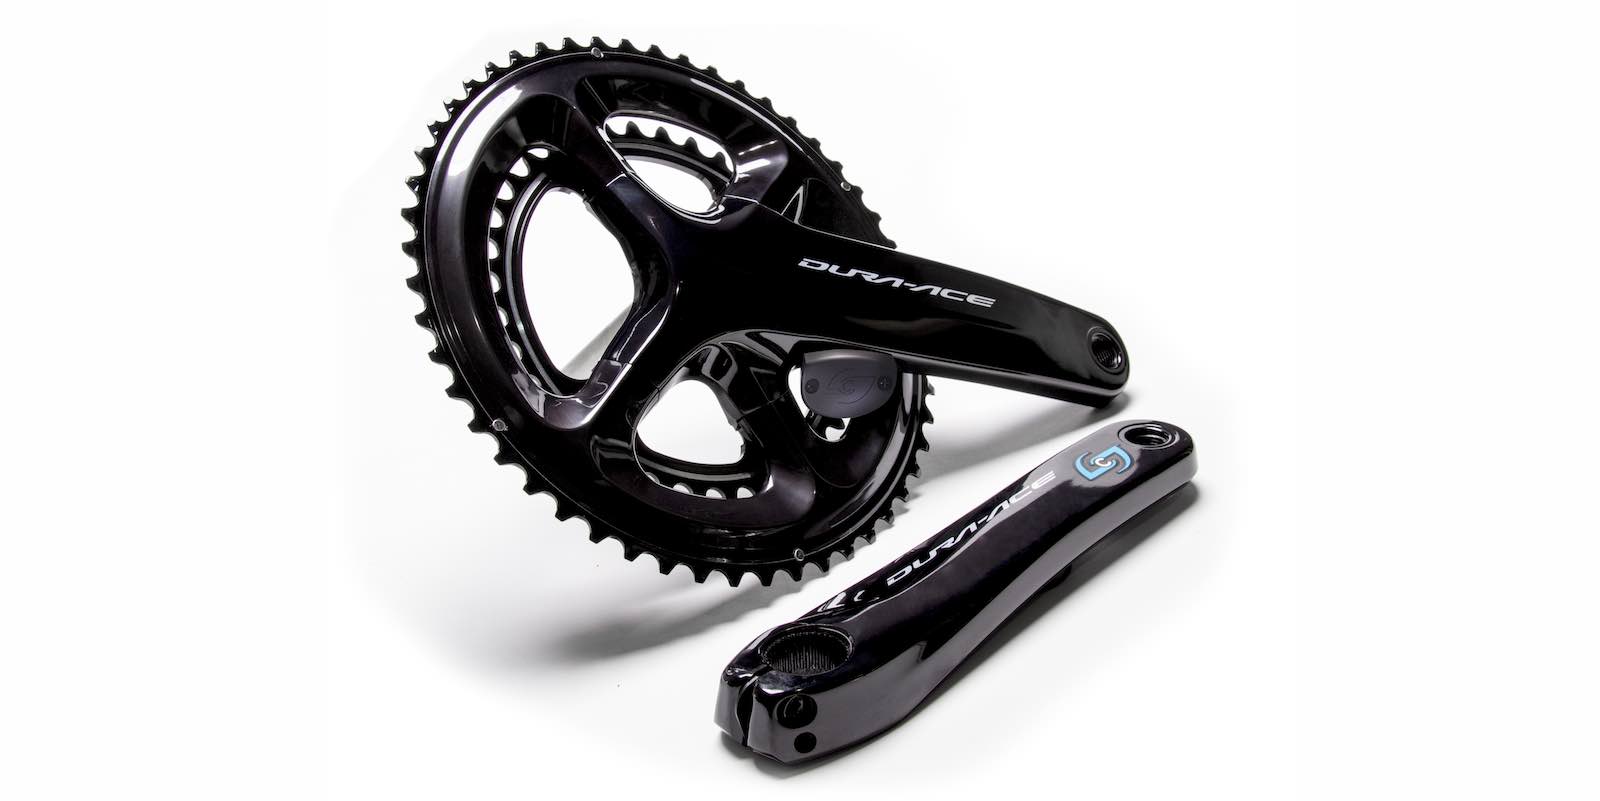 stages power meter price